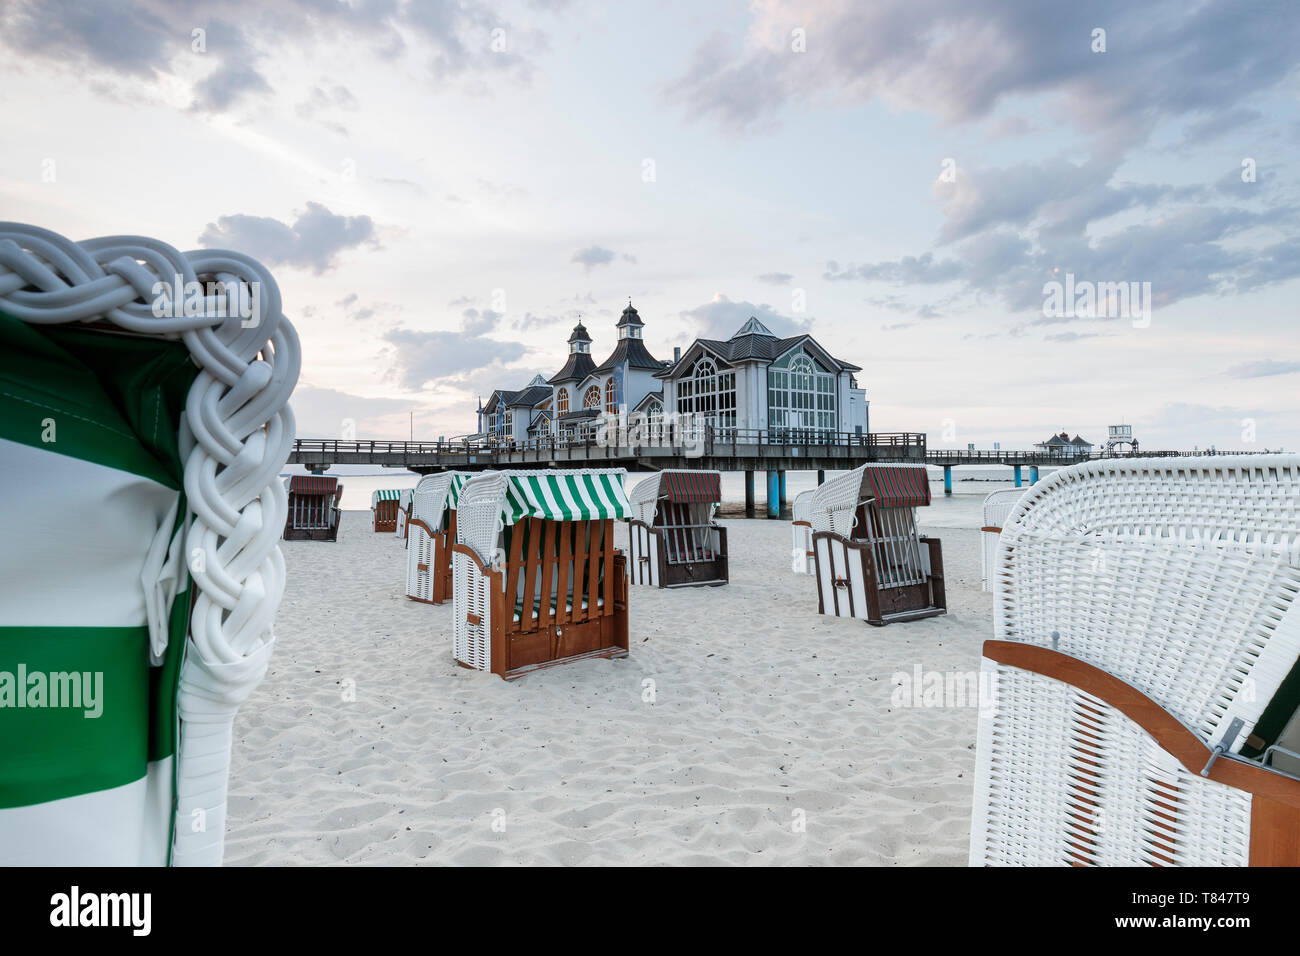 Traditional beach chairs and pier, Sellin, Rugen, Mecklenburg-Vorpommern, Germany Stock Photo